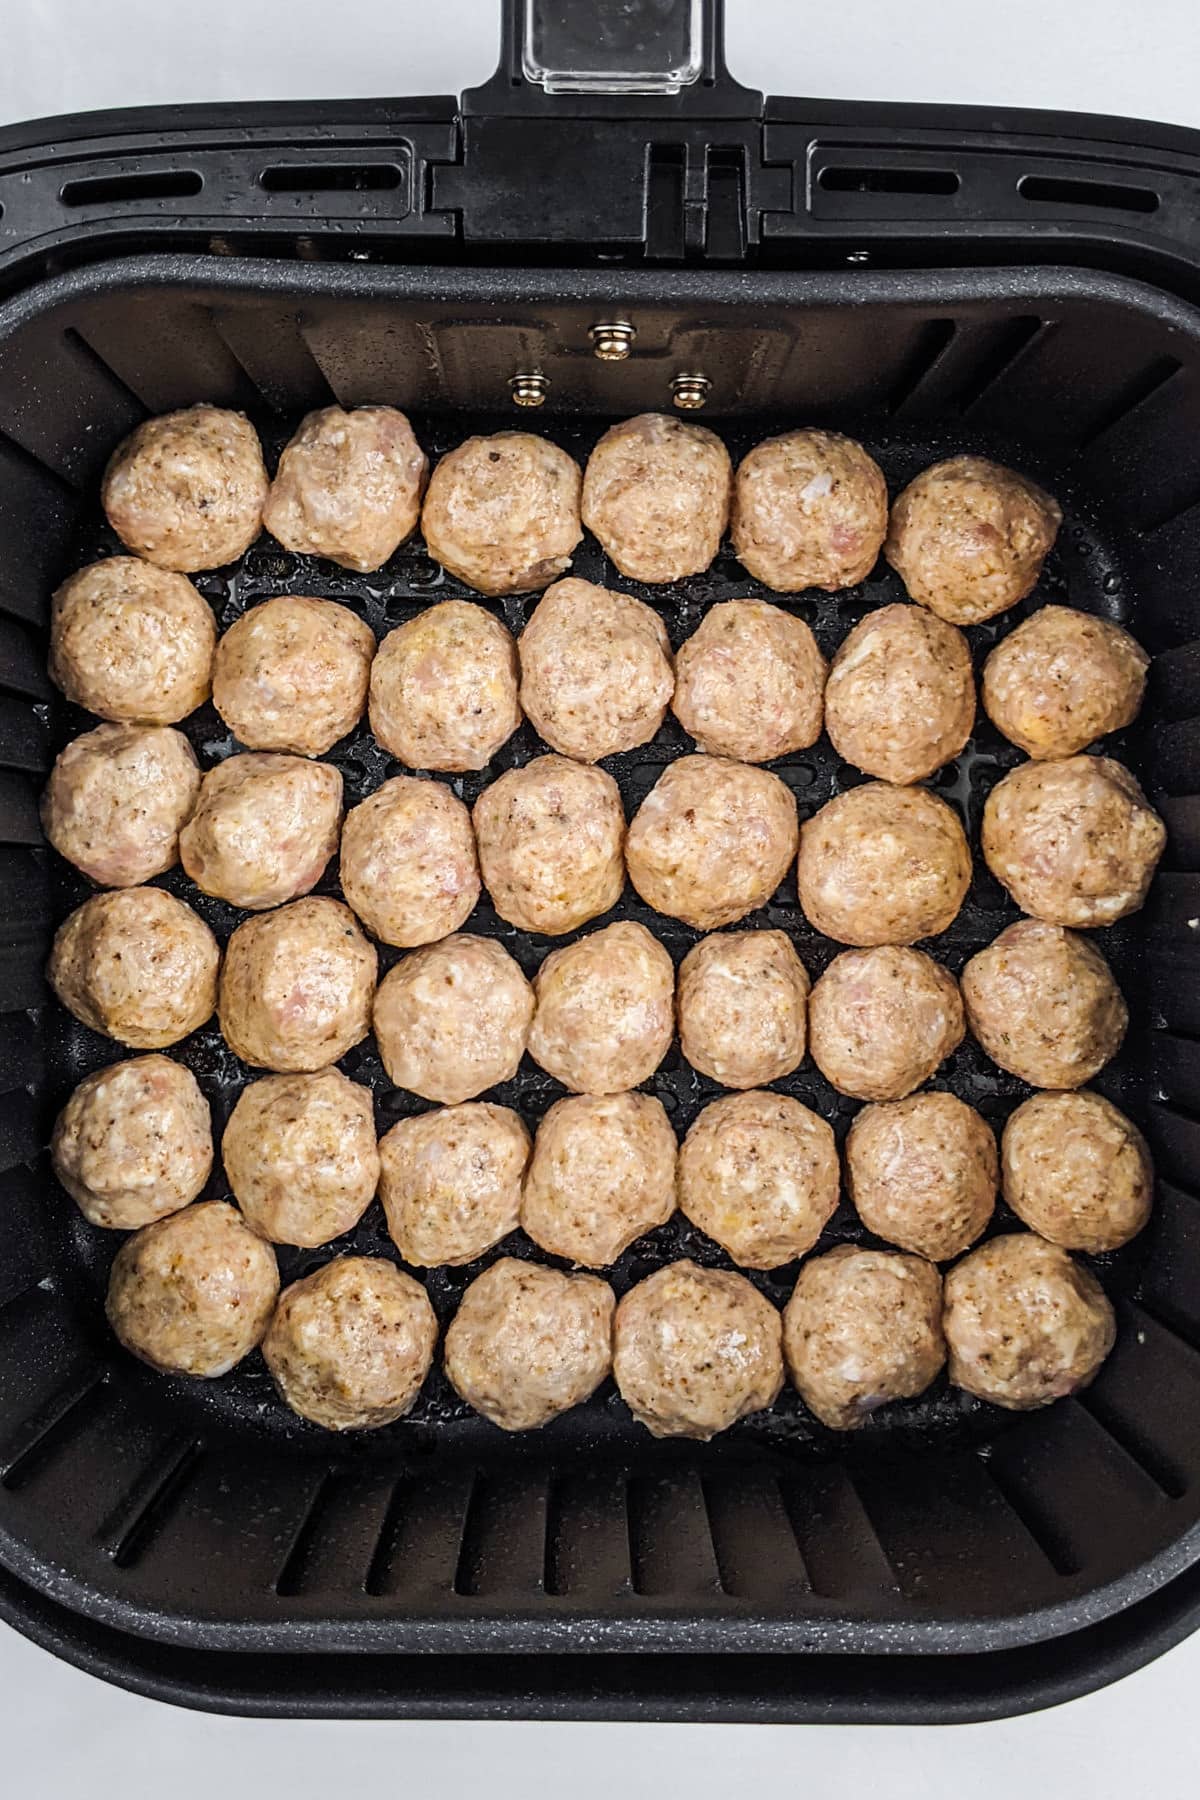 Top view of an air fryer basket with homemade chicken meatballs.